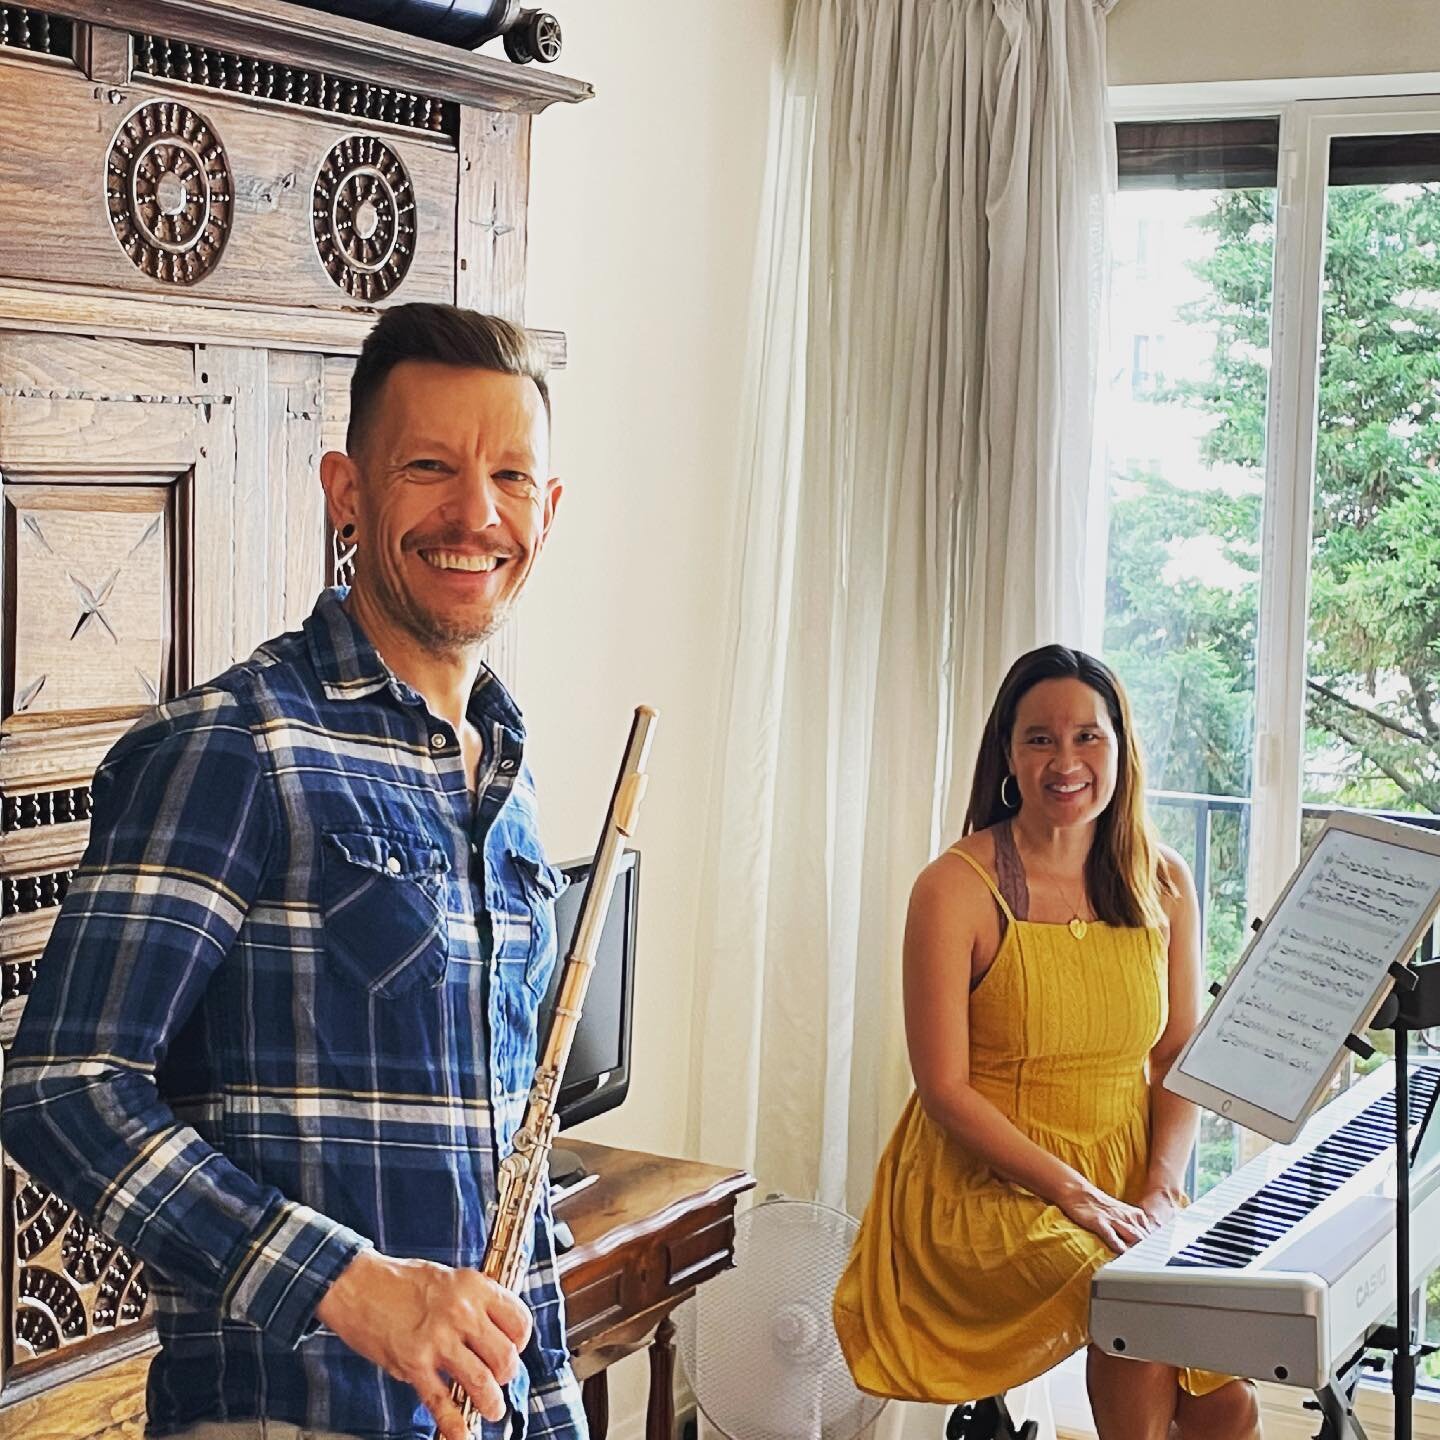 Finally reunited! So looking forward to this, our first public performance since the before times.

.

Saturday, July 17 @ 4pm
&Eacute;glise Saint-Merry
74 Rue de la Verrerie
75004 Paris

#weareback #duo970 #paris #flute #piano #fluteandpiano #bach #